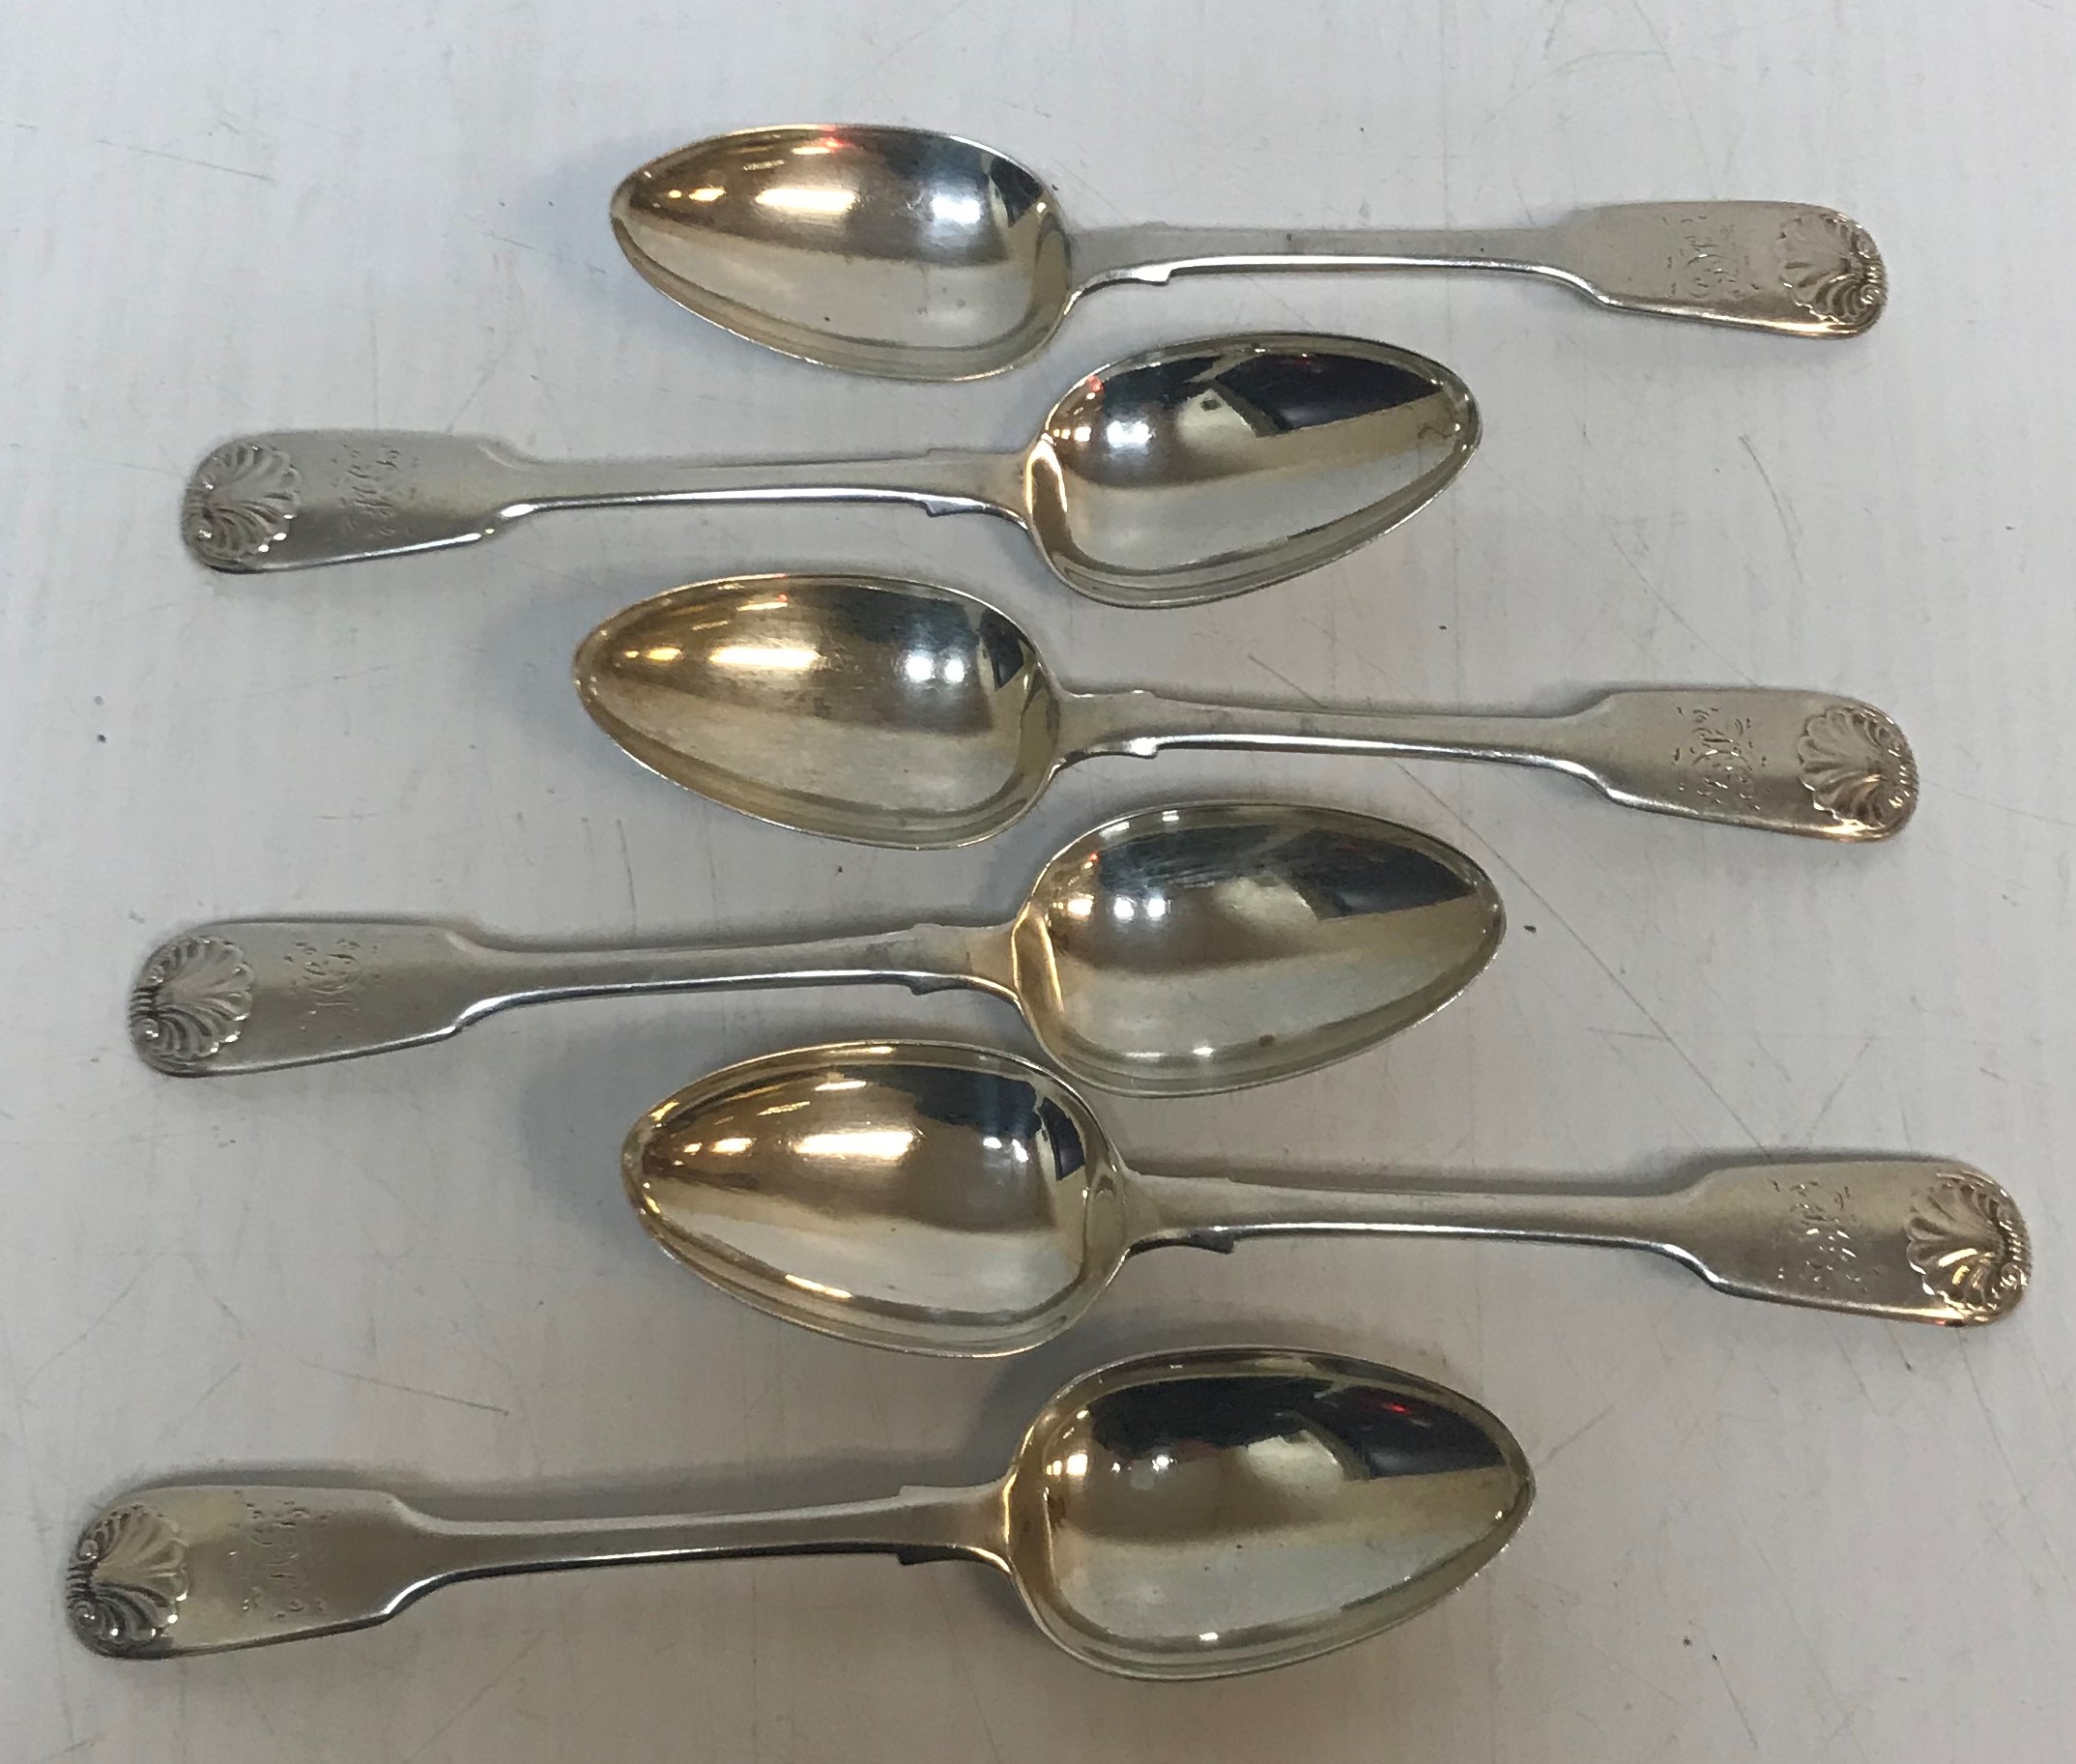 A set of six Victorian silver "Fiddle and shell" pattern dessert spoons with indistinct engraving